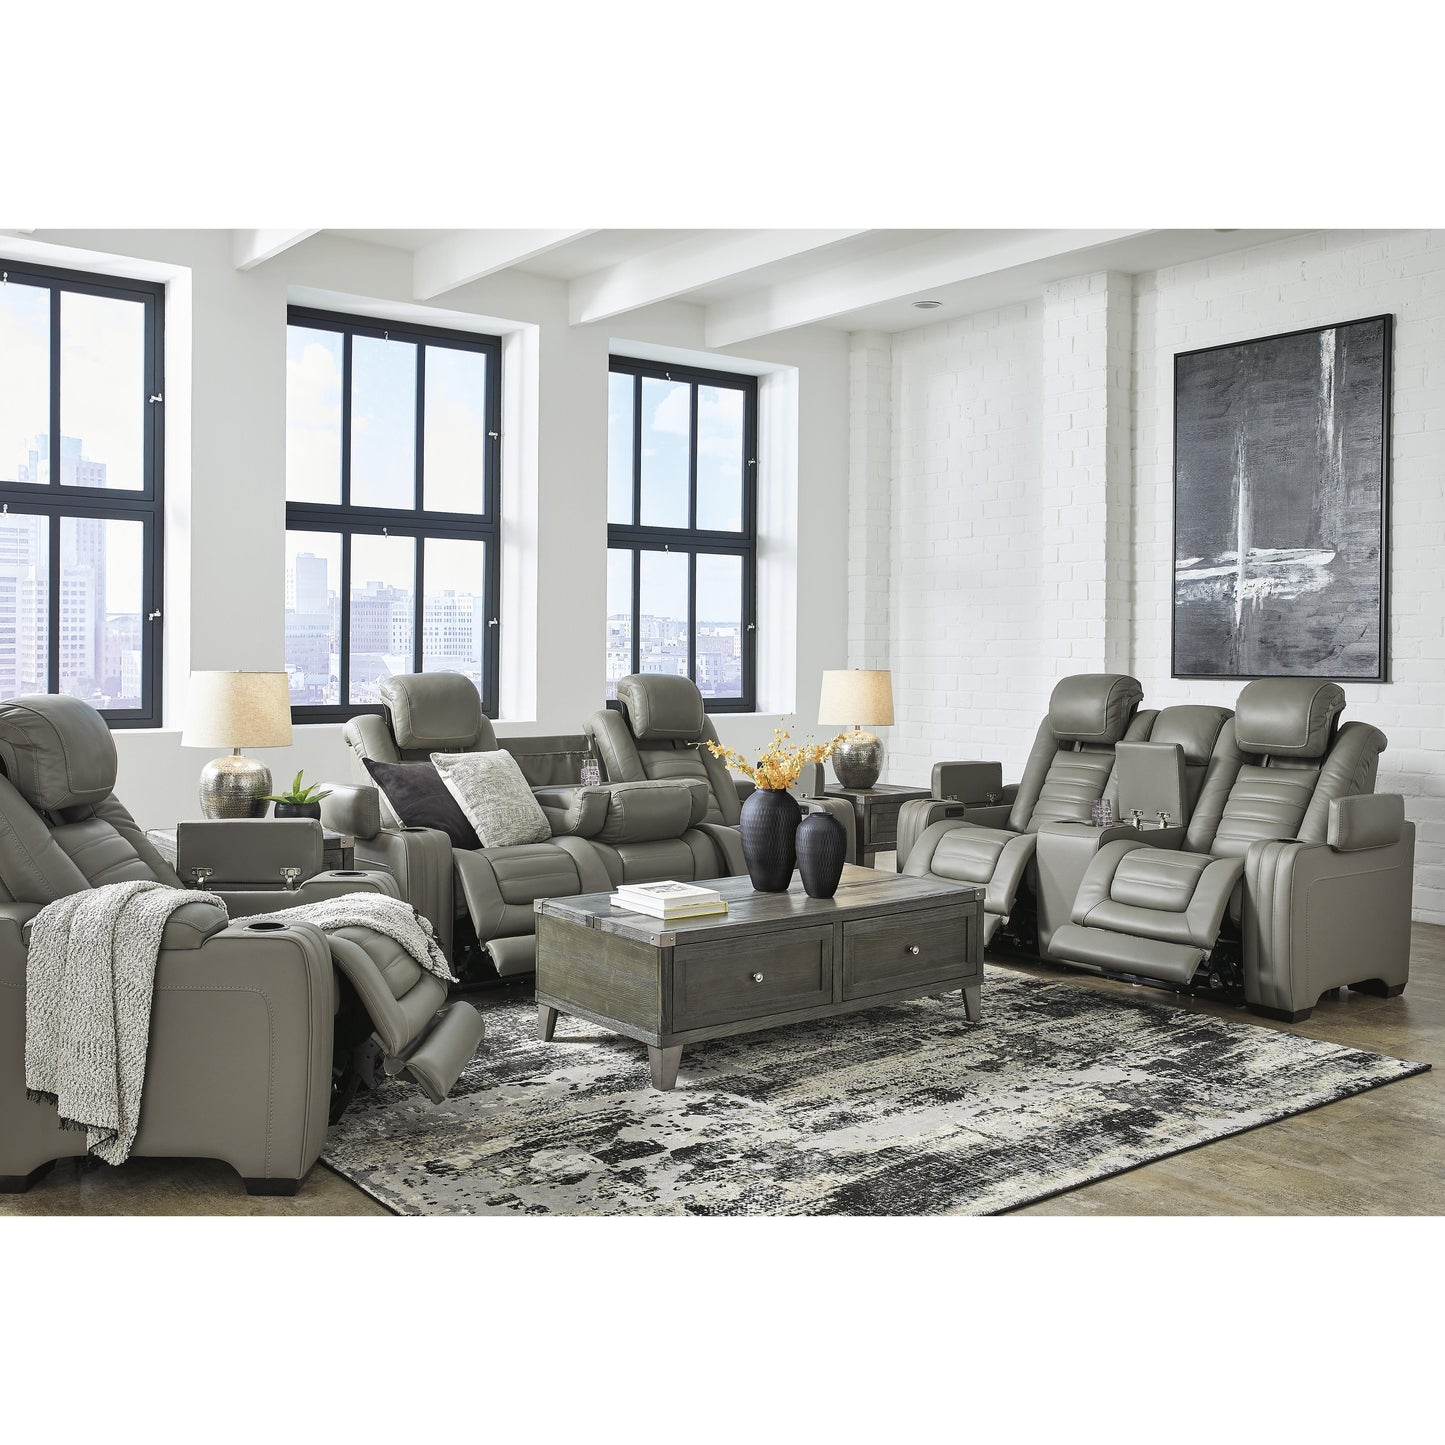 Signature Design by Ashley Backtrack Power Leather Match Recliner U2800513 IMAGE 9